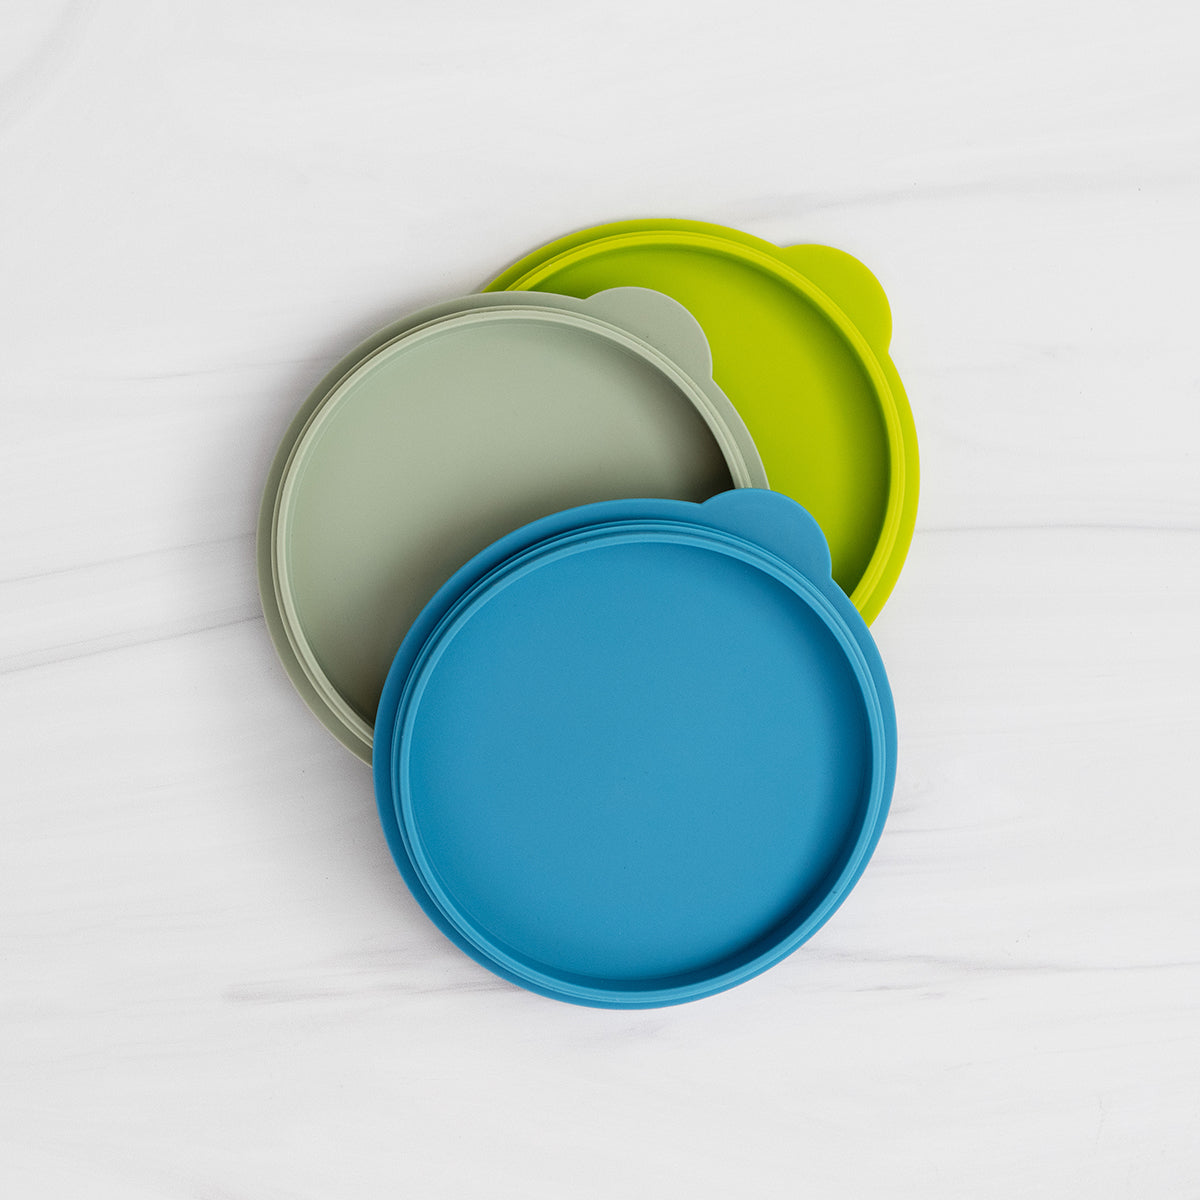 Mini Bowl Lid in Blue by ezpz / The Original All-In-One Silicone Plates & Placemats that Stick to the Table